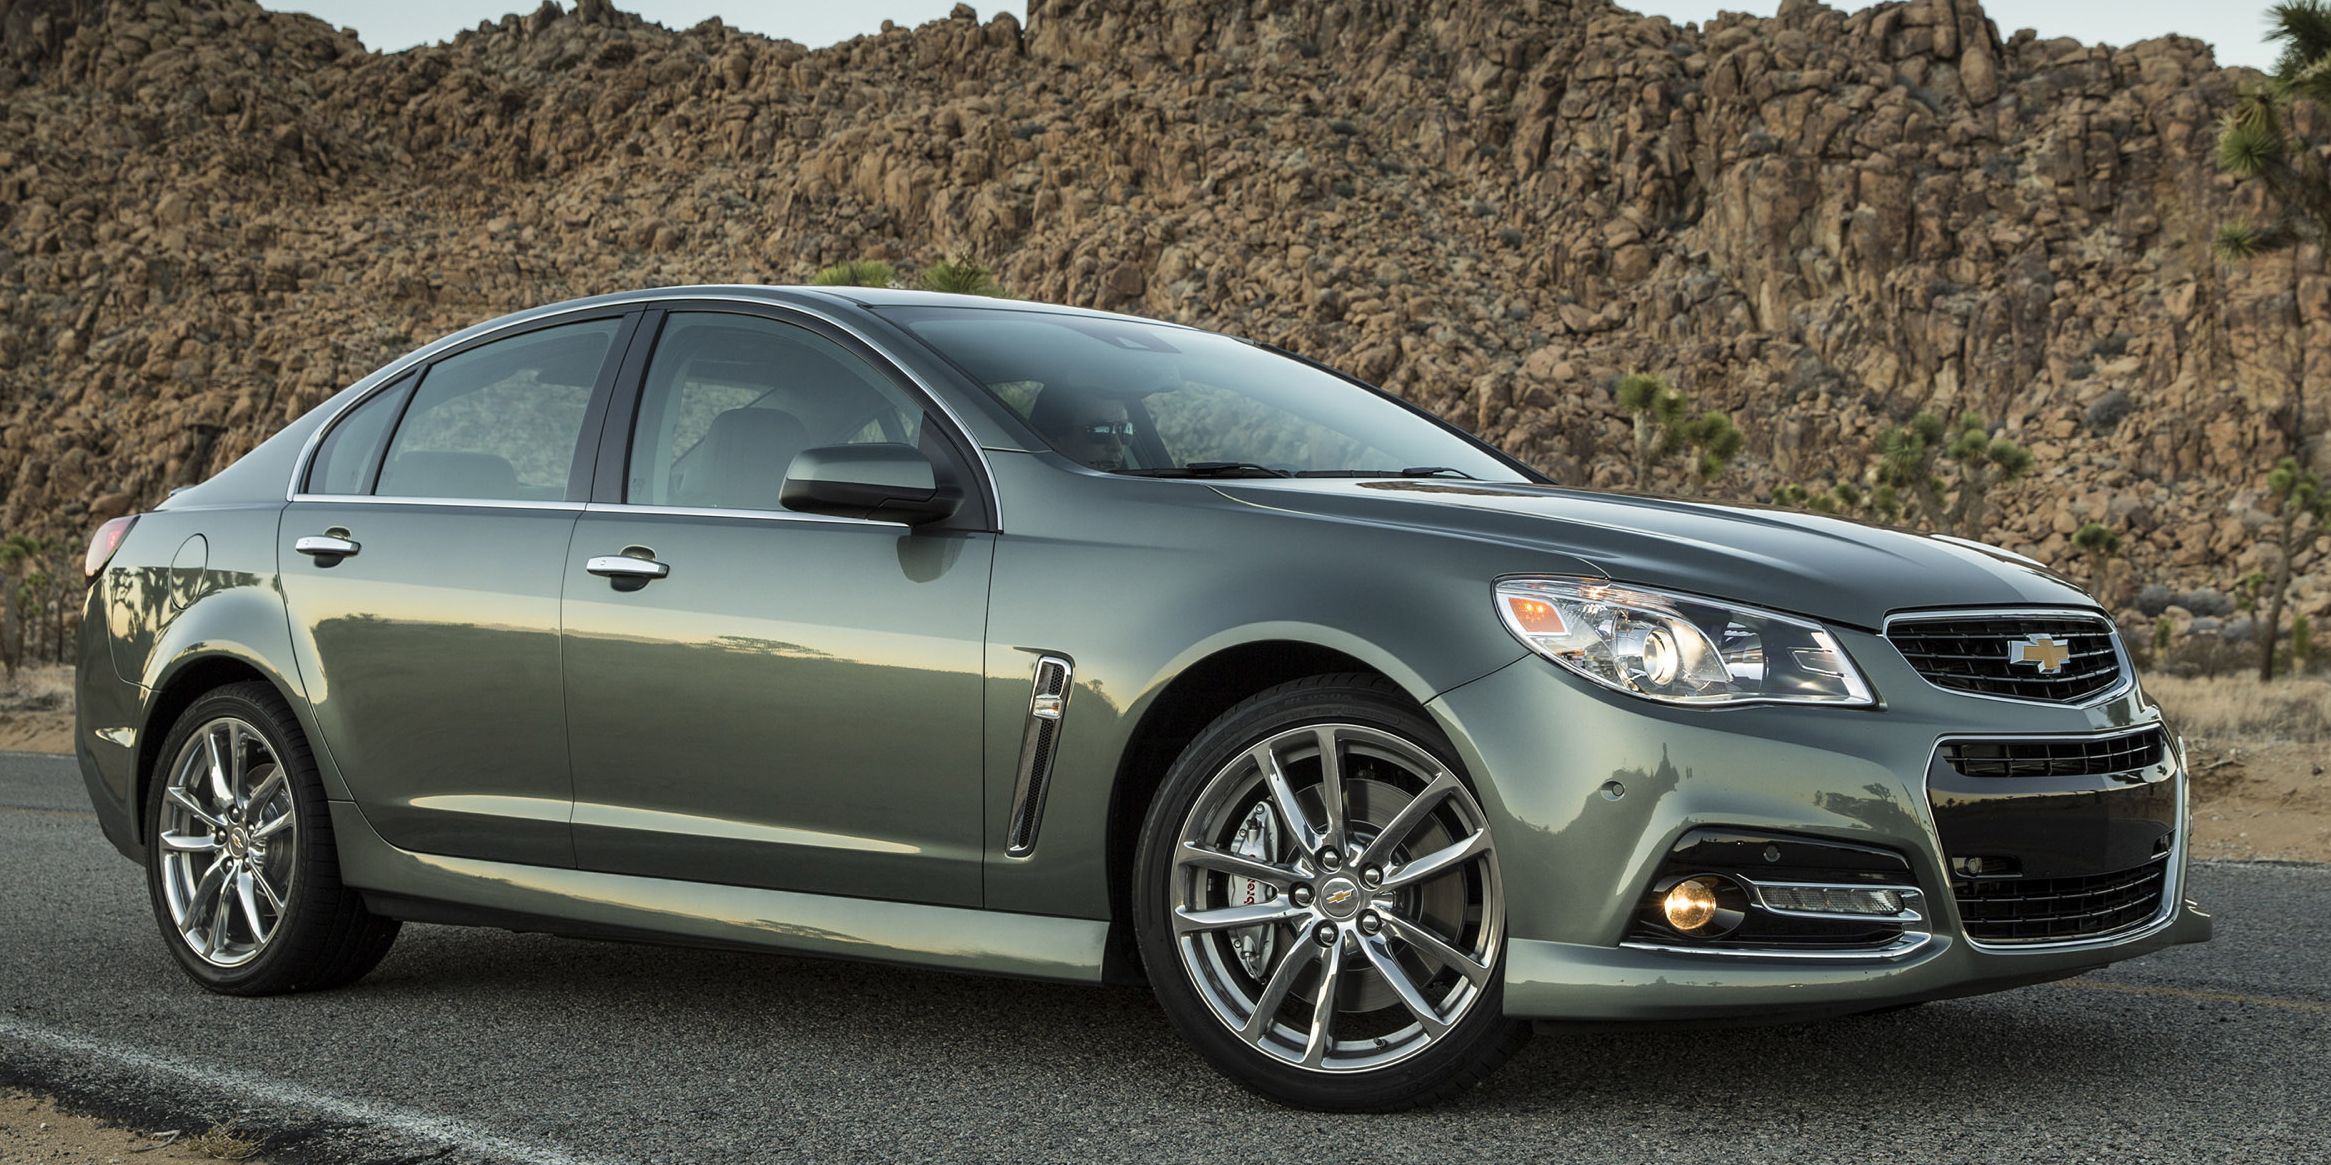 Chevy Ss Discontinued Chevrolet Ss Stops Production In 17